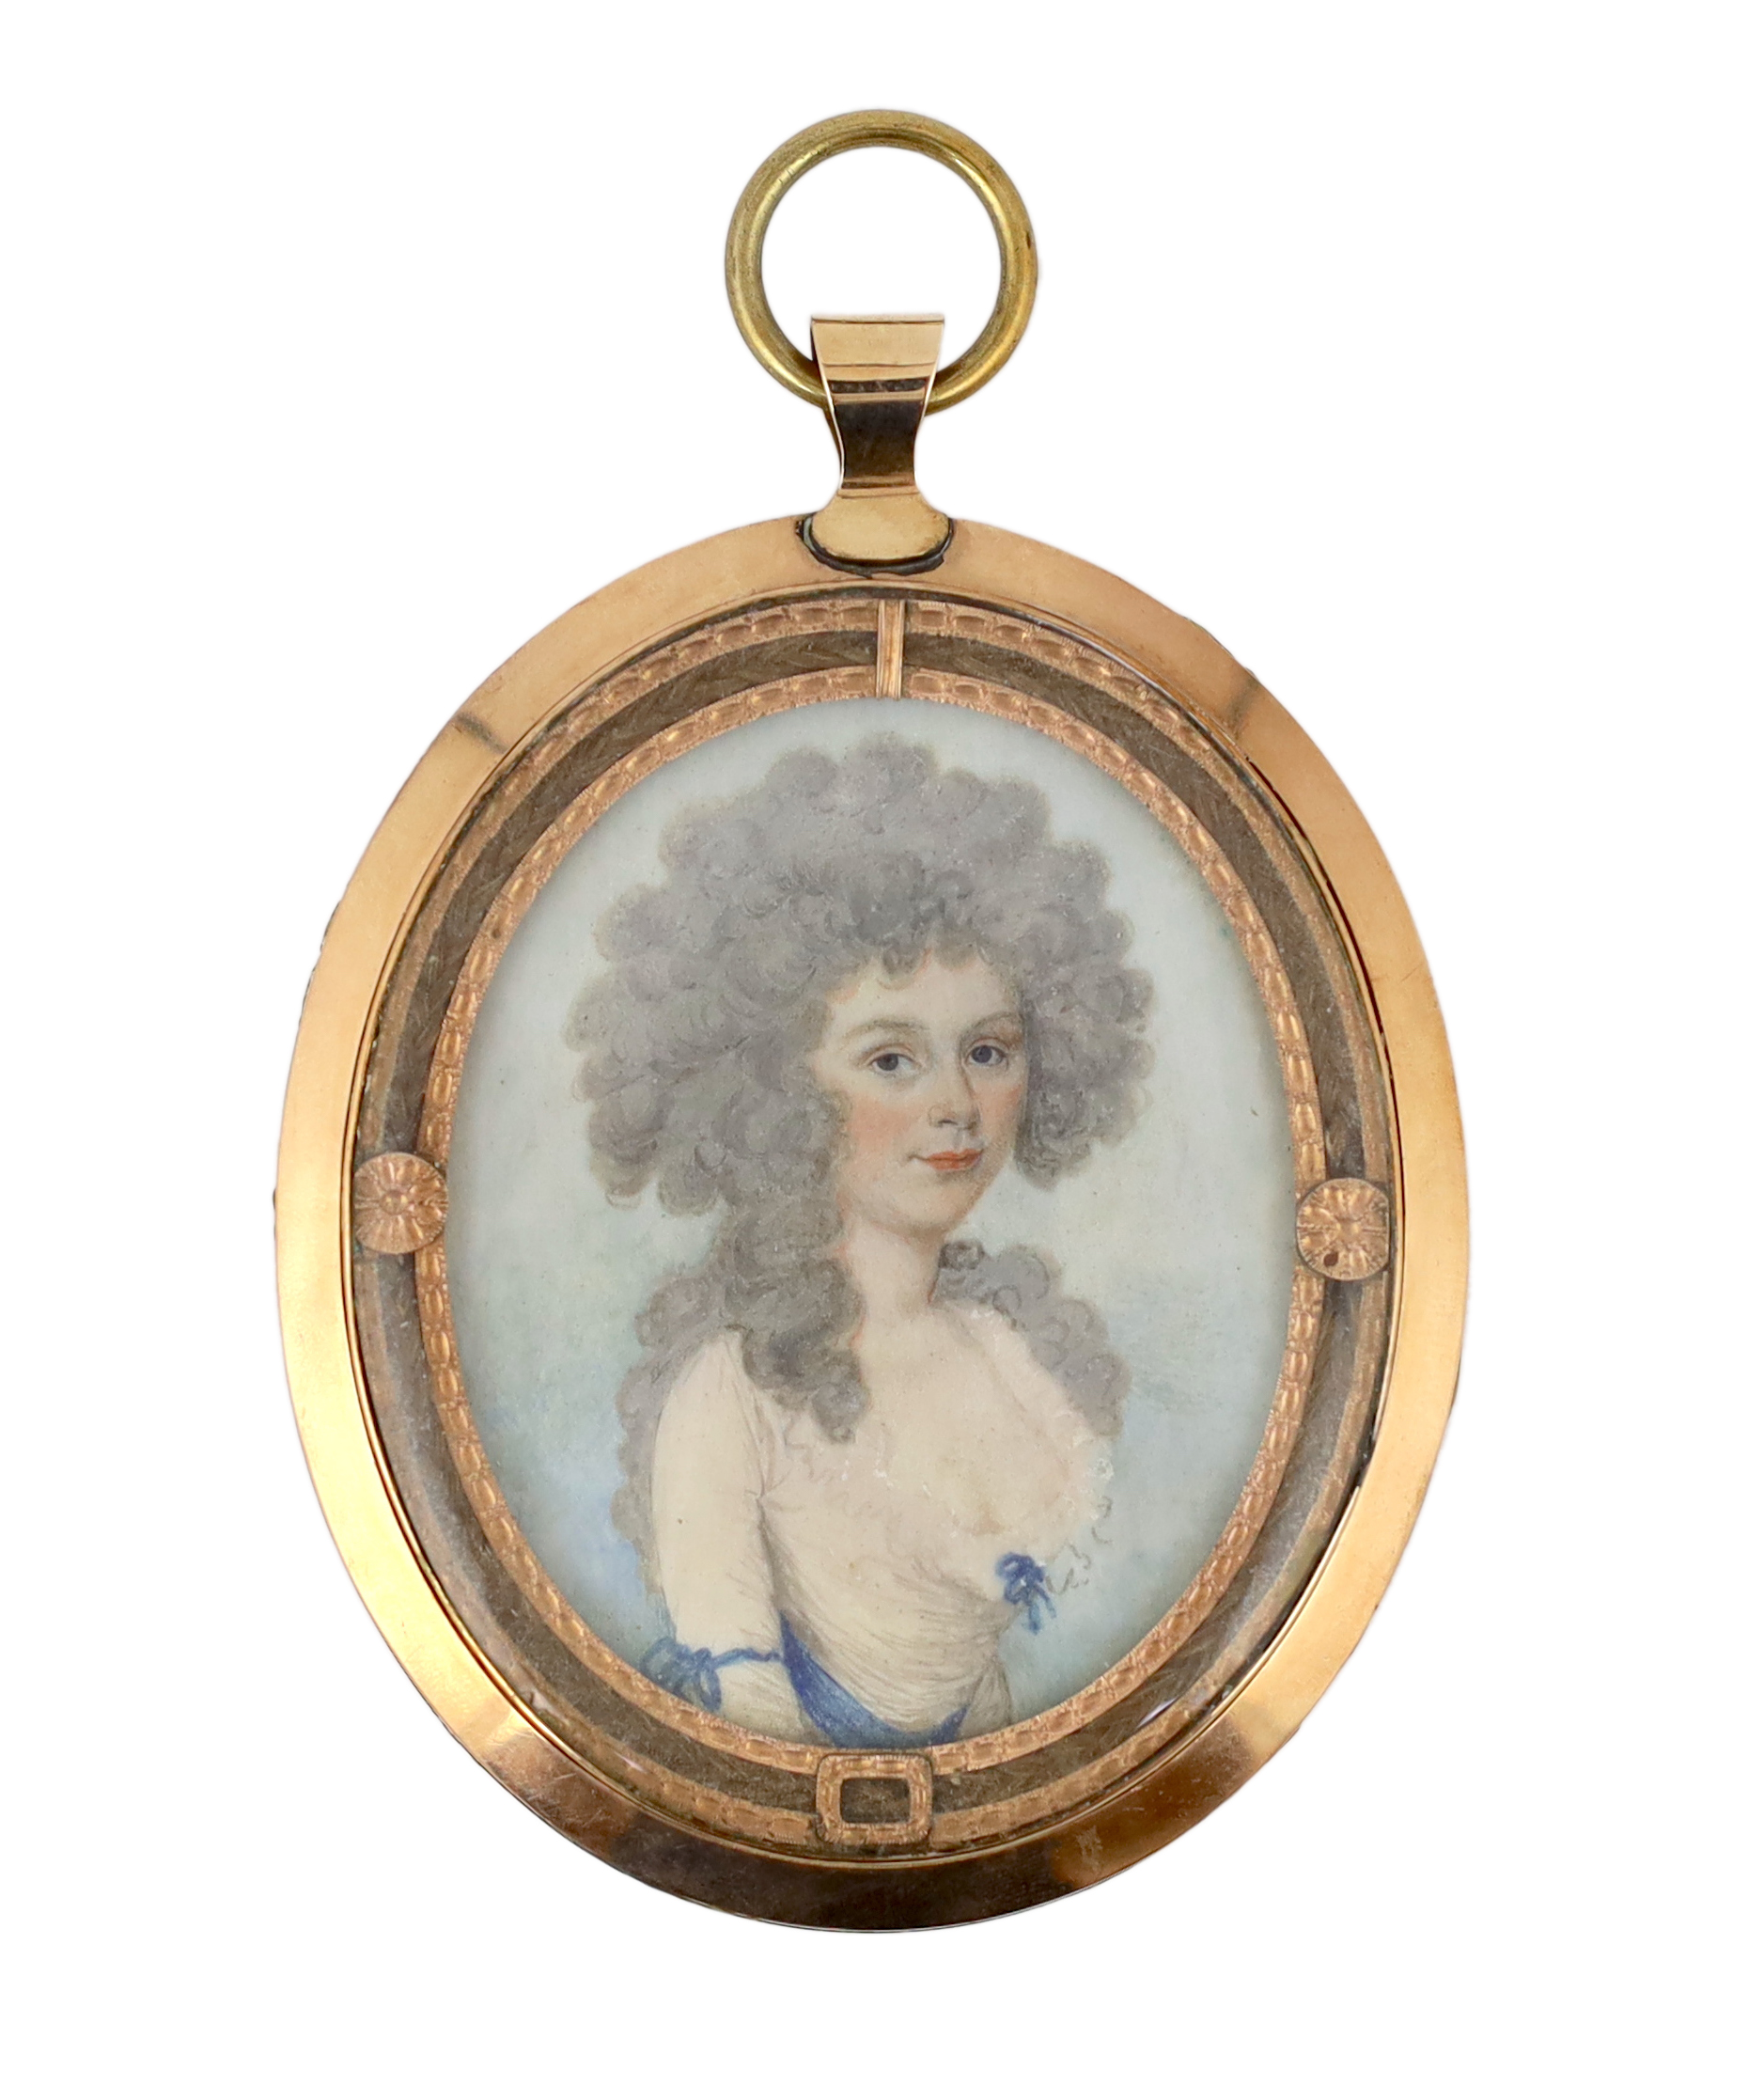 18th Century Continental School, Portrait miniature of a lady, watercolour on ivory, 5.5 x 4.5cm. CITES Submission reference 4XBYH8KD